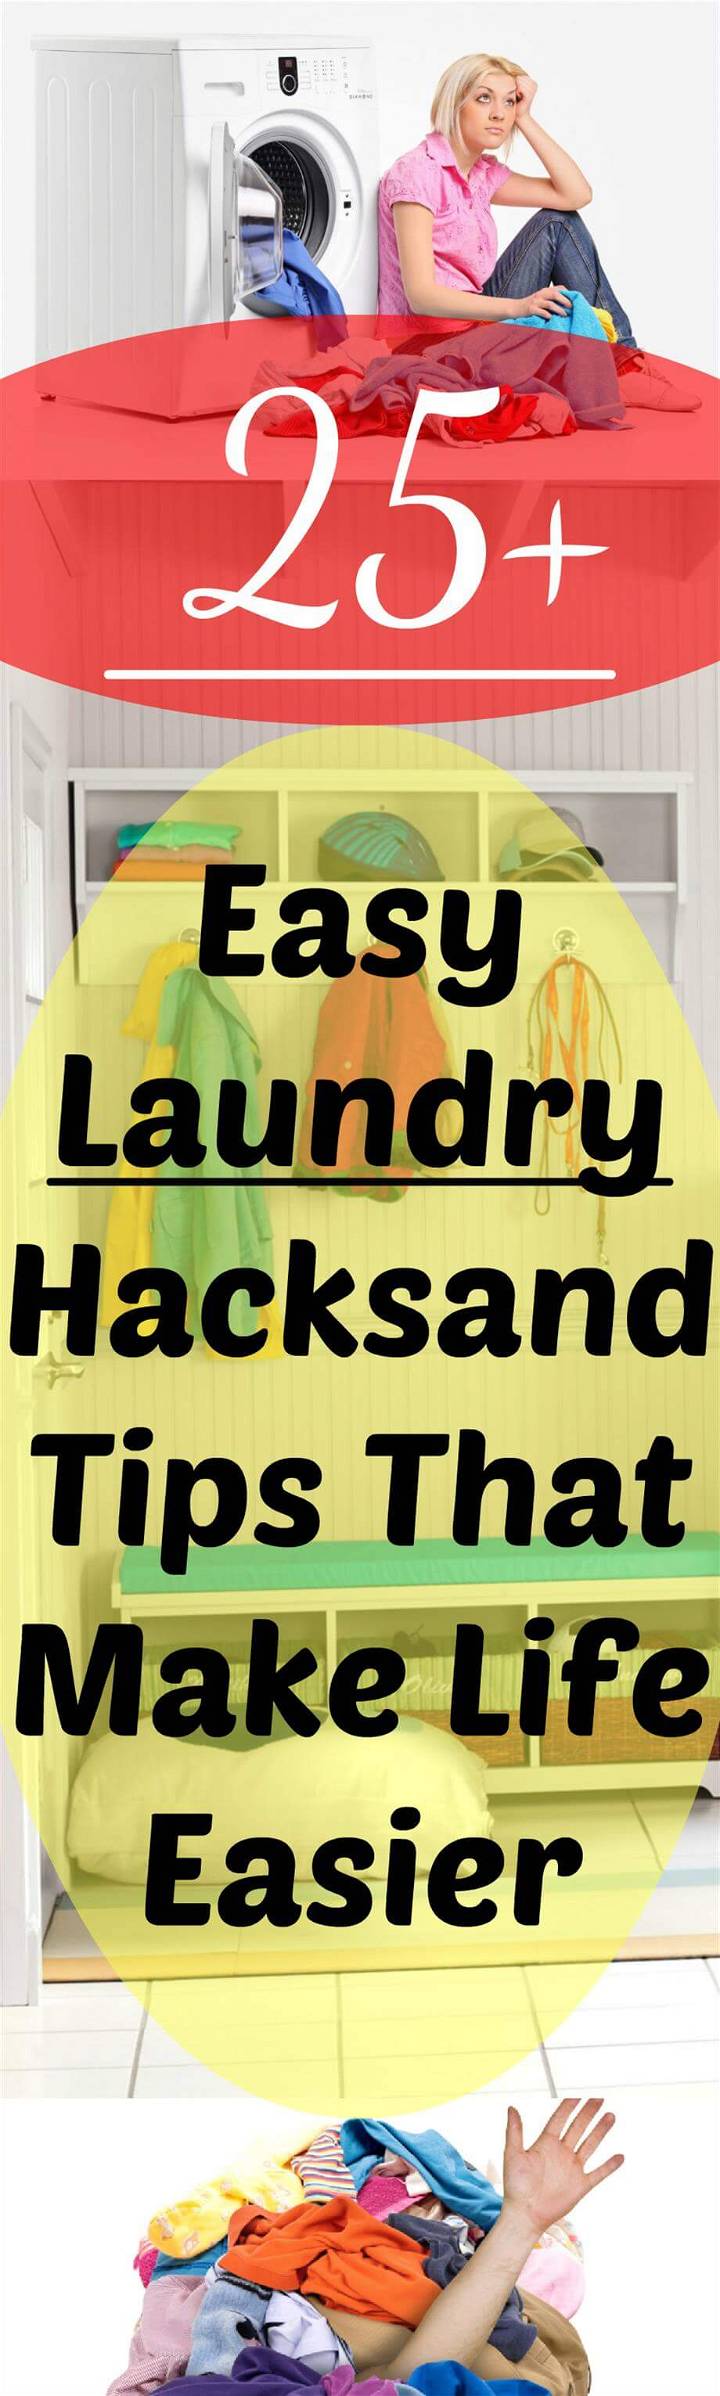 Laundry Hacks and Tips